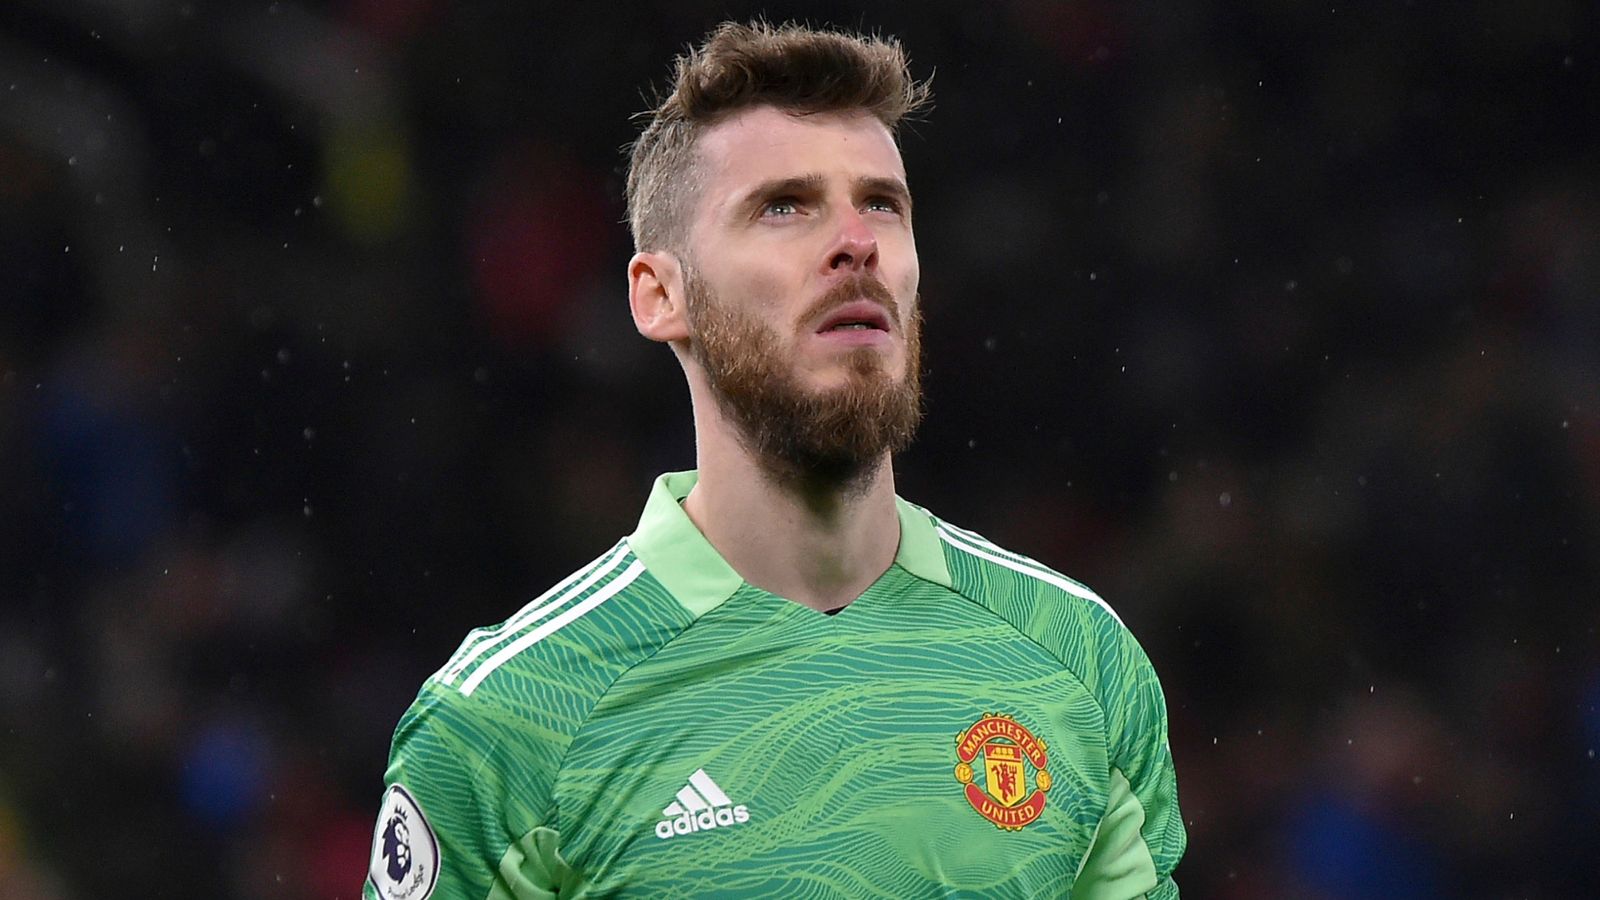 David de Gea on his future: 'I don't see myself away from Manchester United'